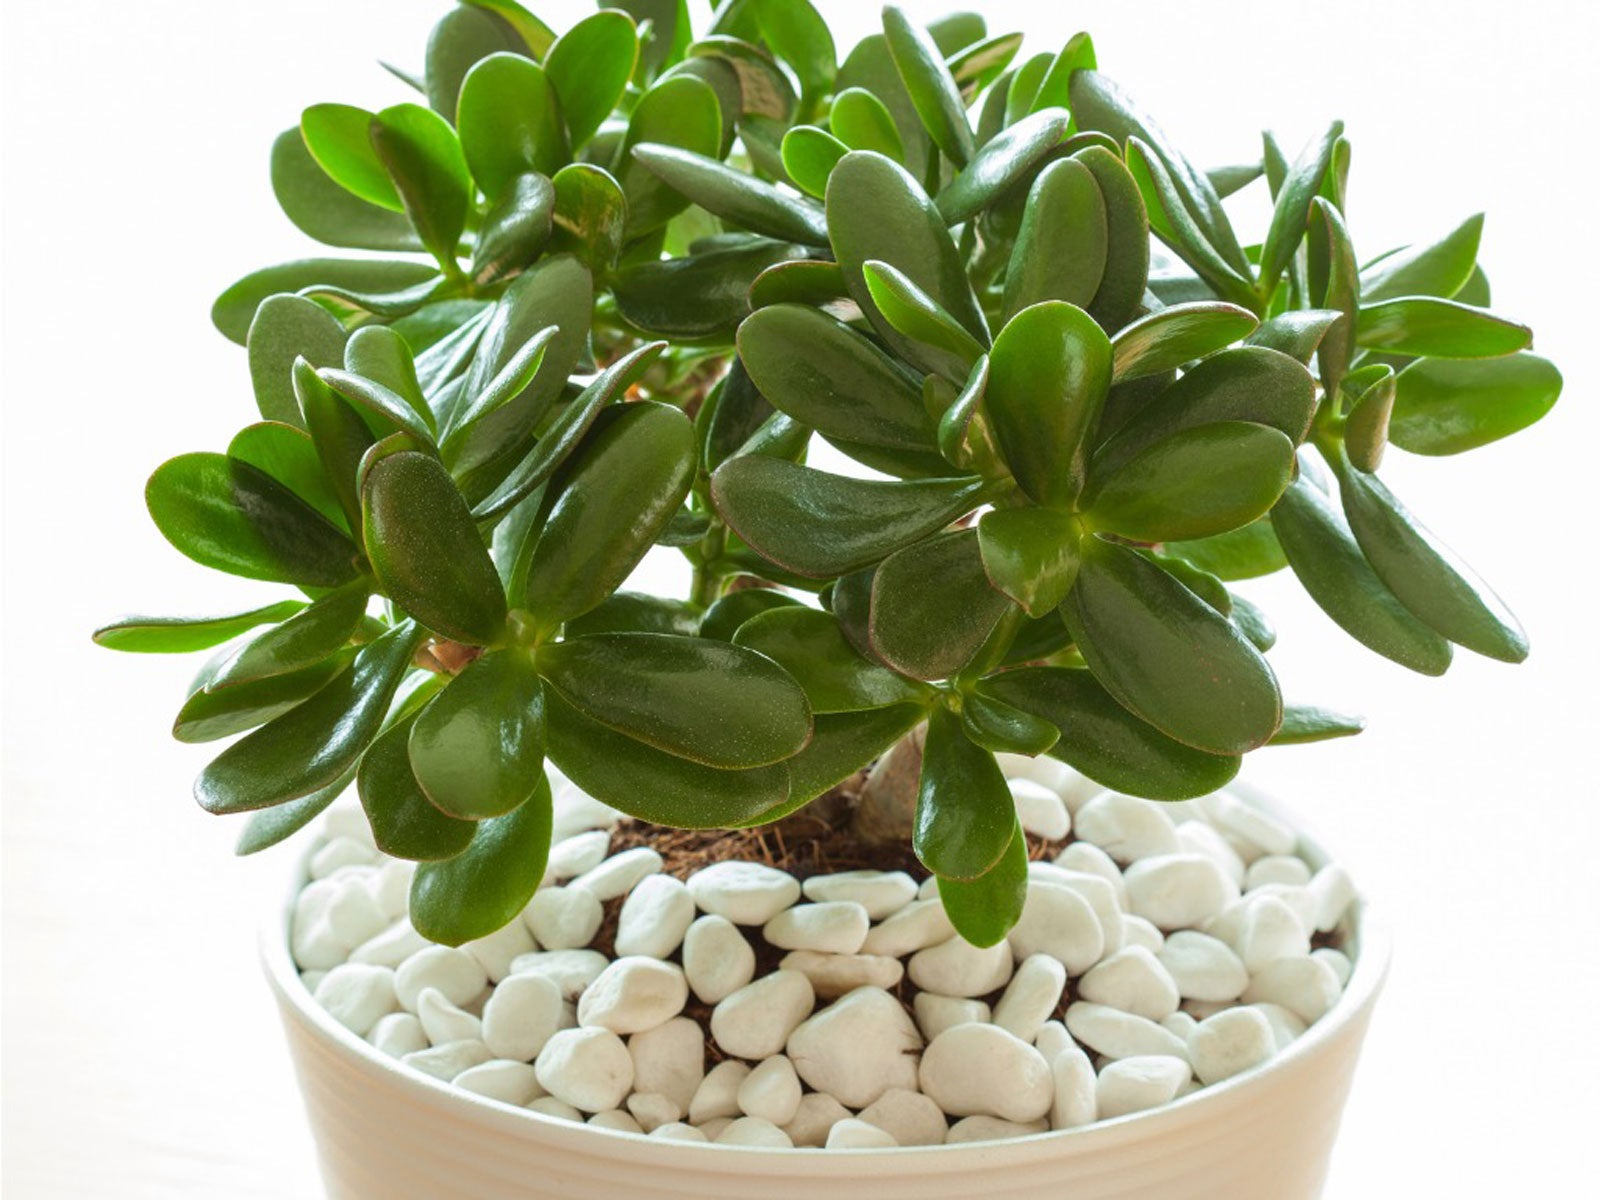 Jade Plant Care Instructions: How To Care For A Jade Plant